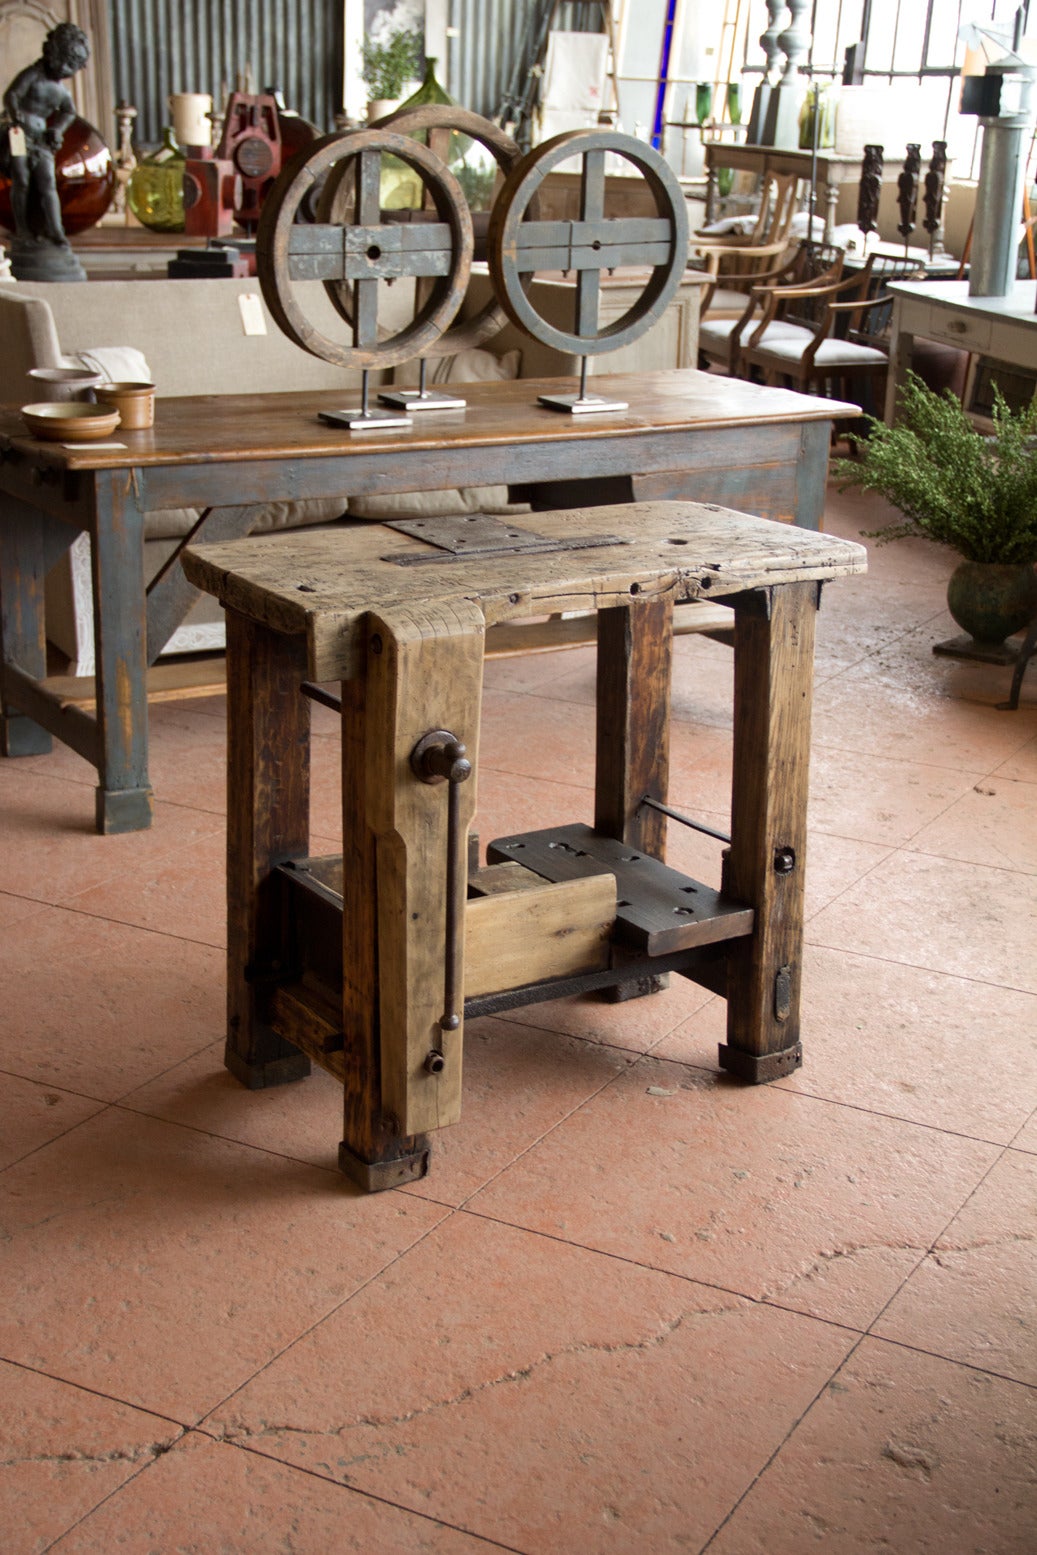 An unusual small French antique gnarly work bench full of character. The top has an unusual iron plate and it comes with its original vise and hopper.